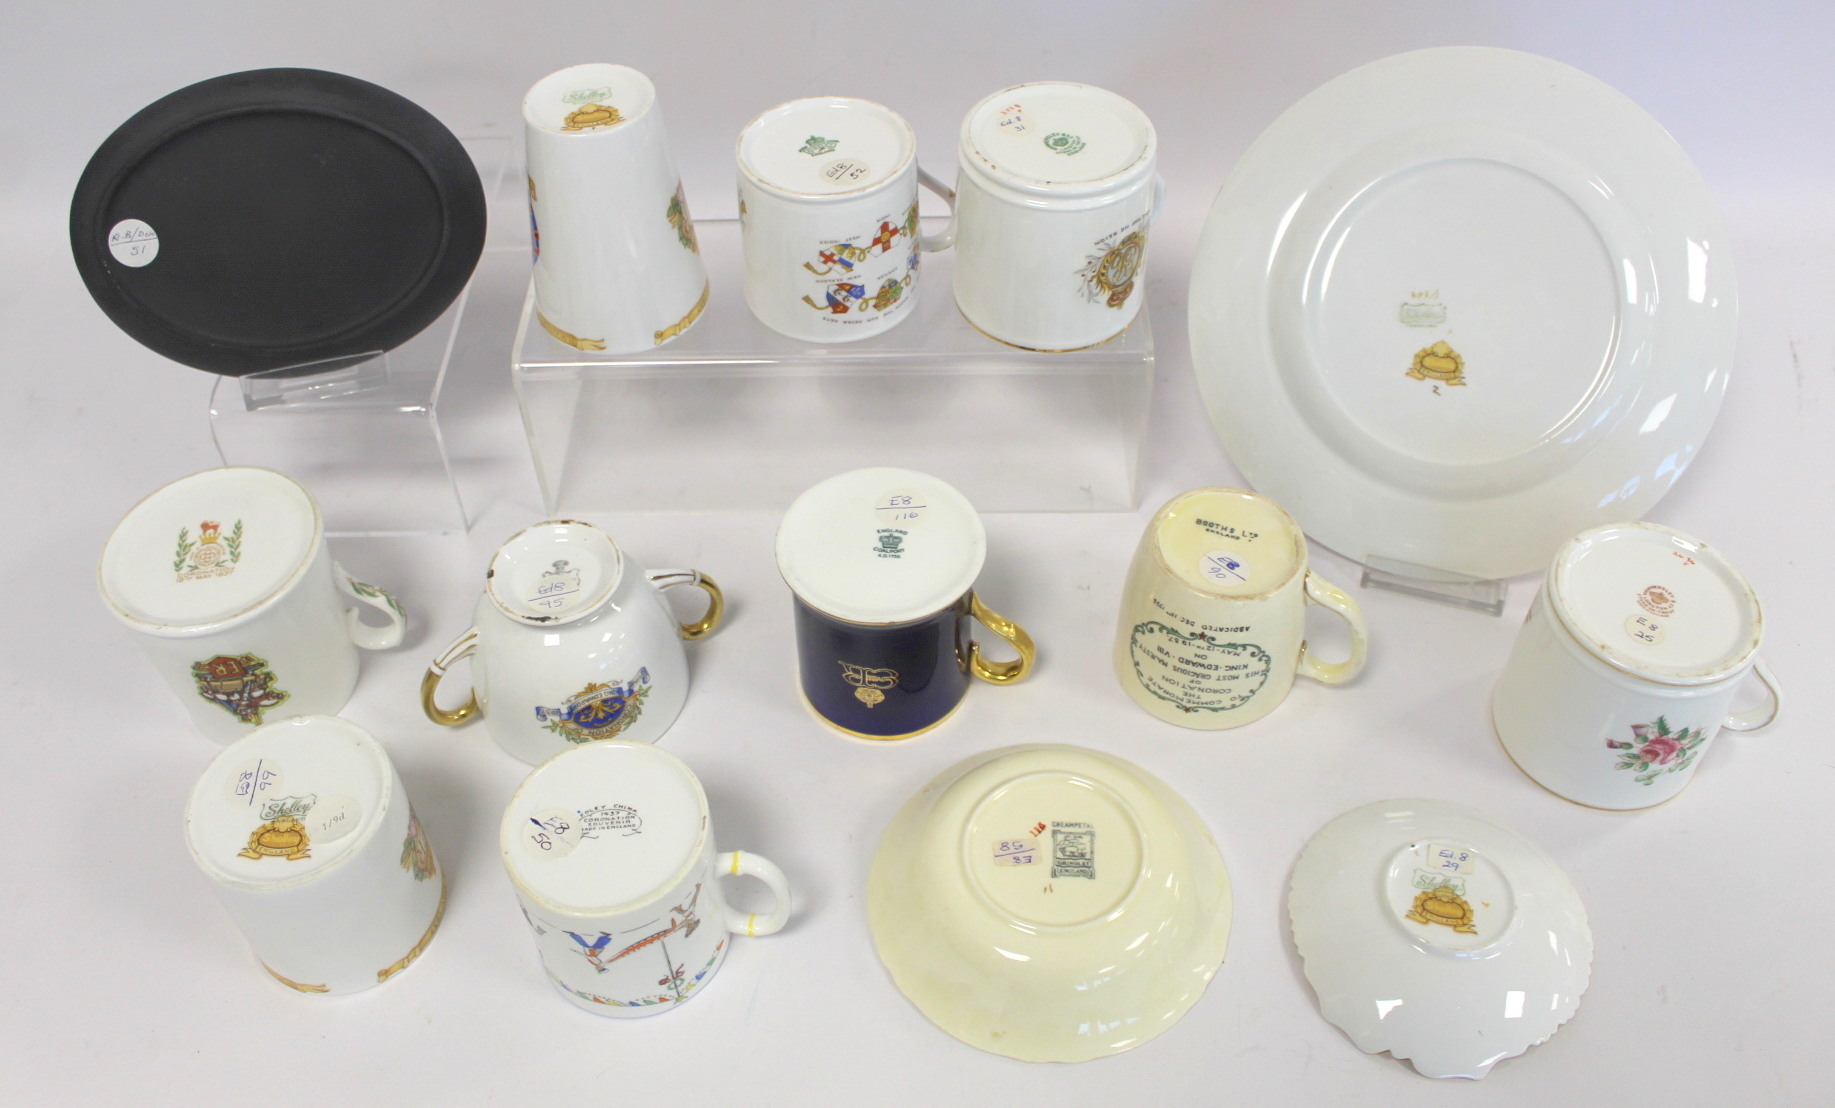 Thirteen pieces of commemorative ware for the Coronation of Edward VIII 1937, including Shelley, - Image 3 of 3